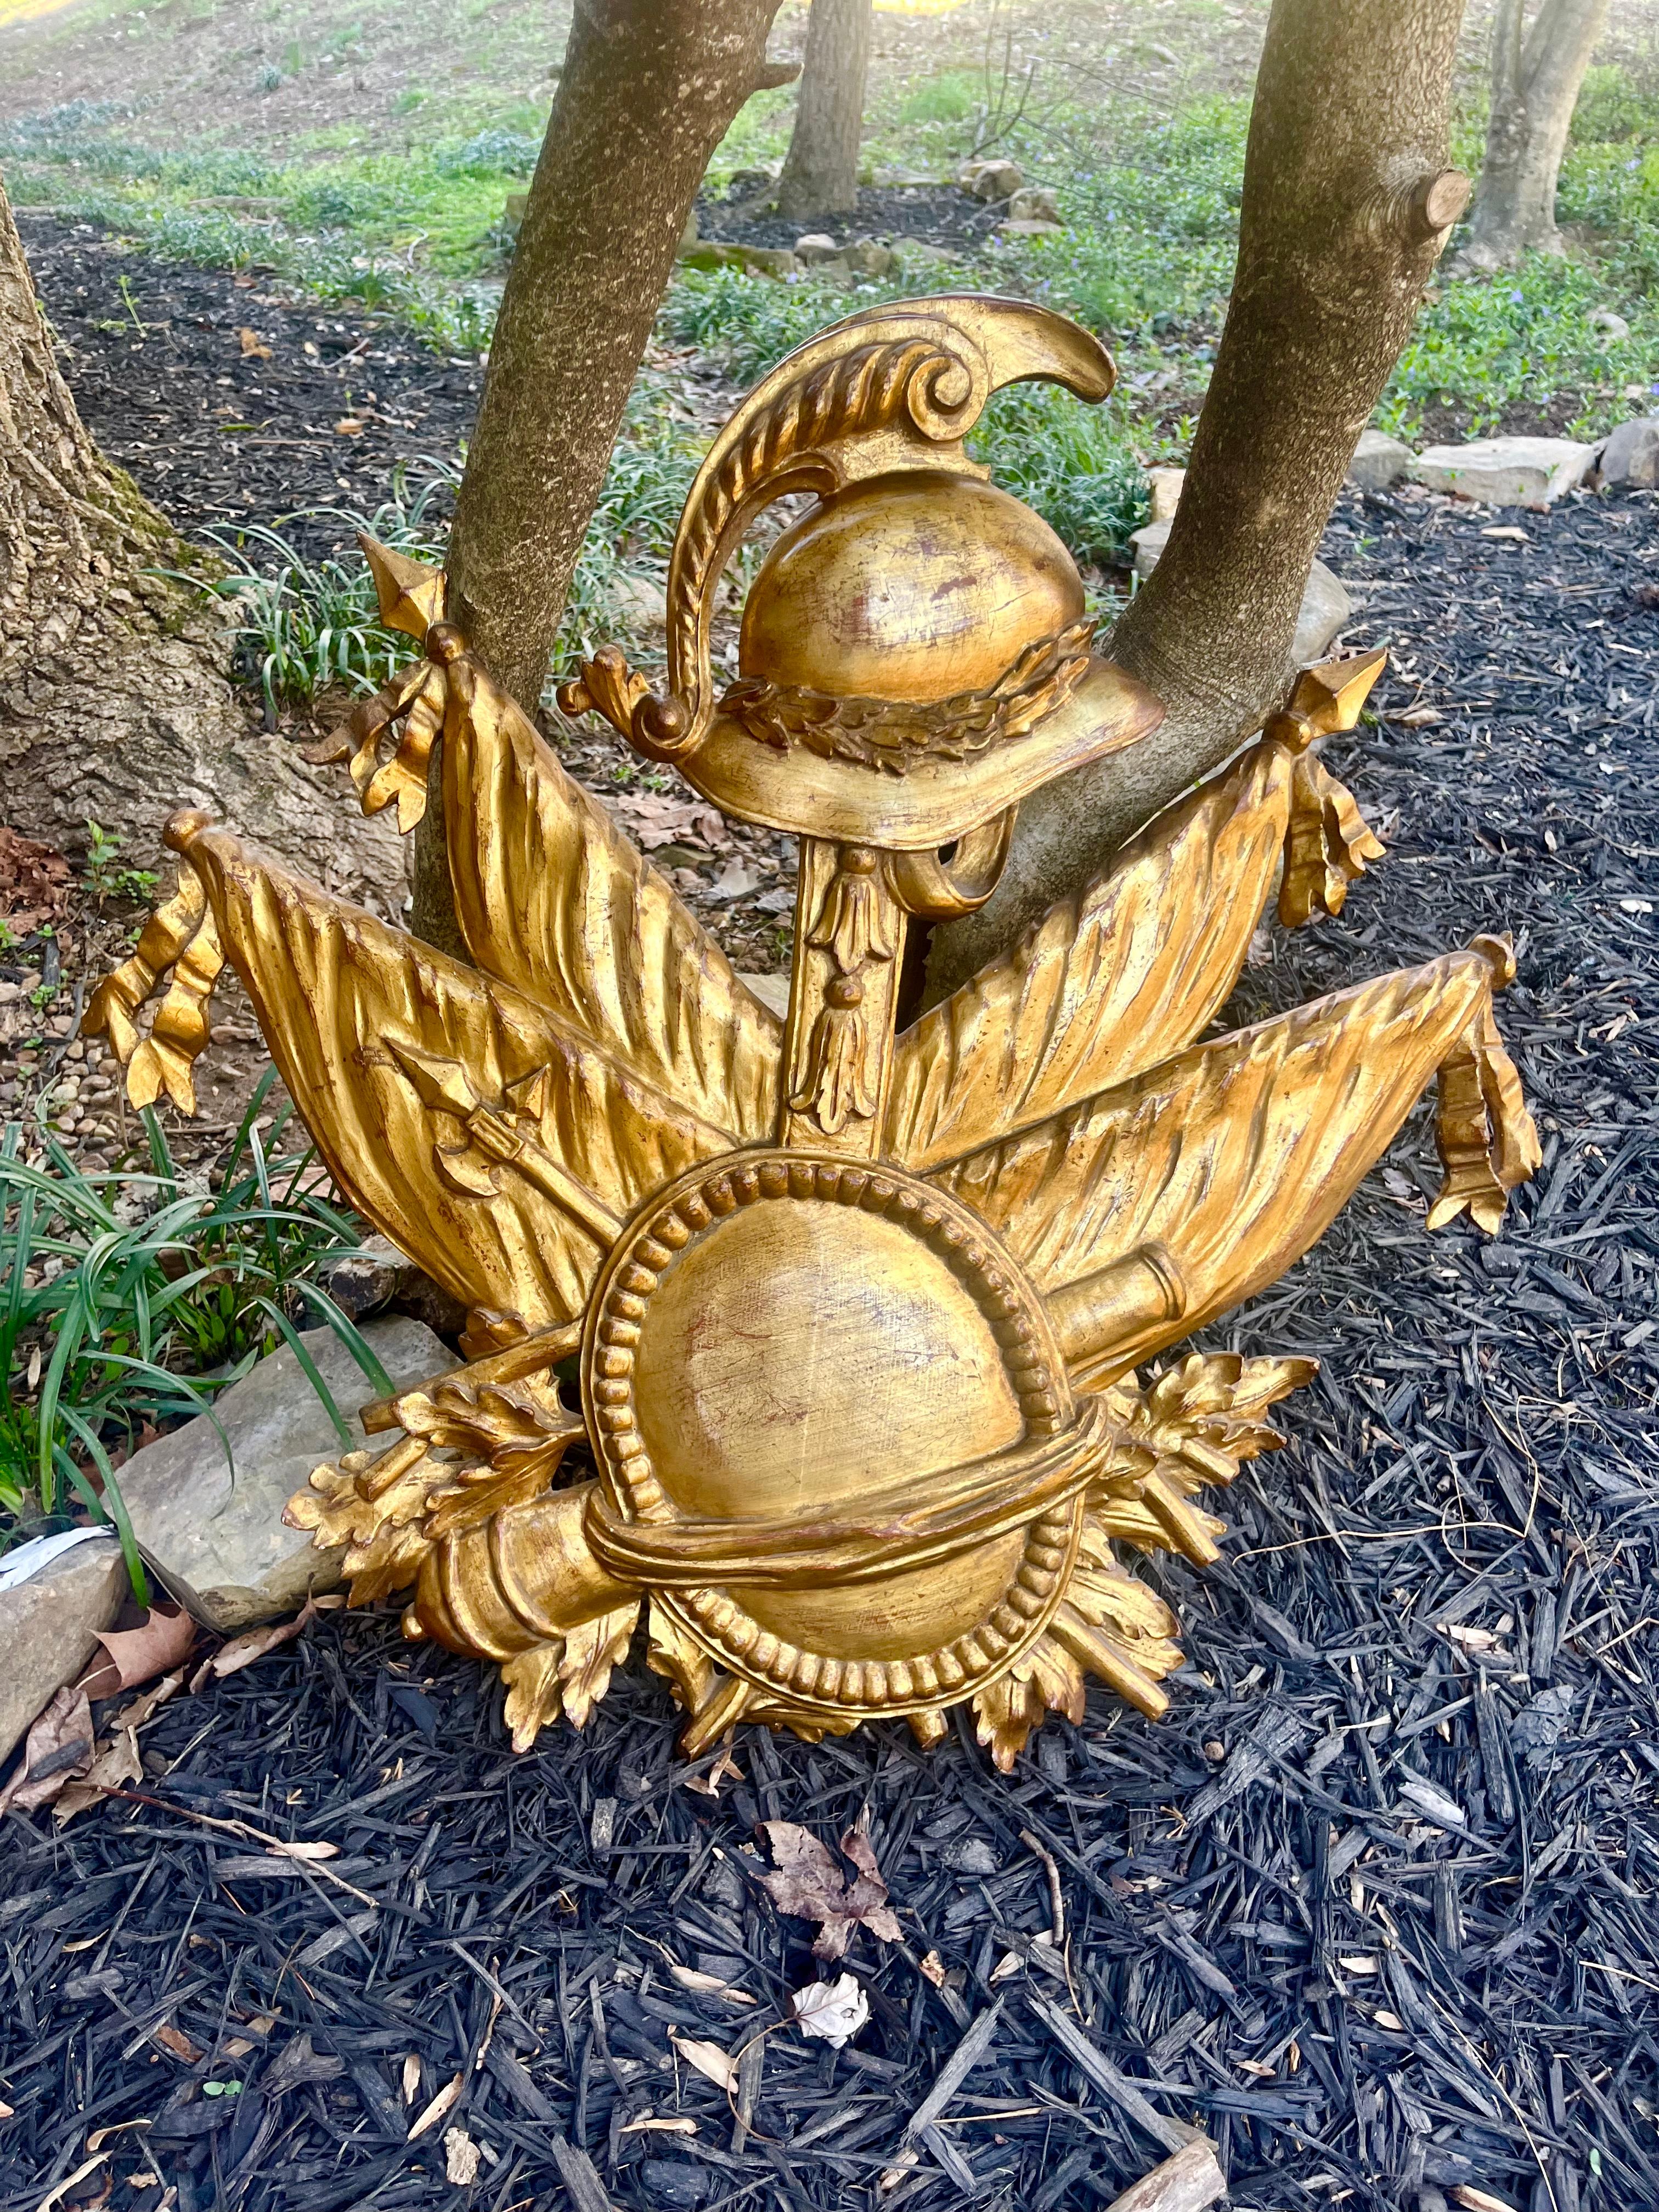 Presents very well  with crisp and well defined carving  . A Giltwood wall carved  trophy. The banners tilt out  , with center helmet and shield .Of military inspiration against background of banners and military accessories .
Sturdy and stable